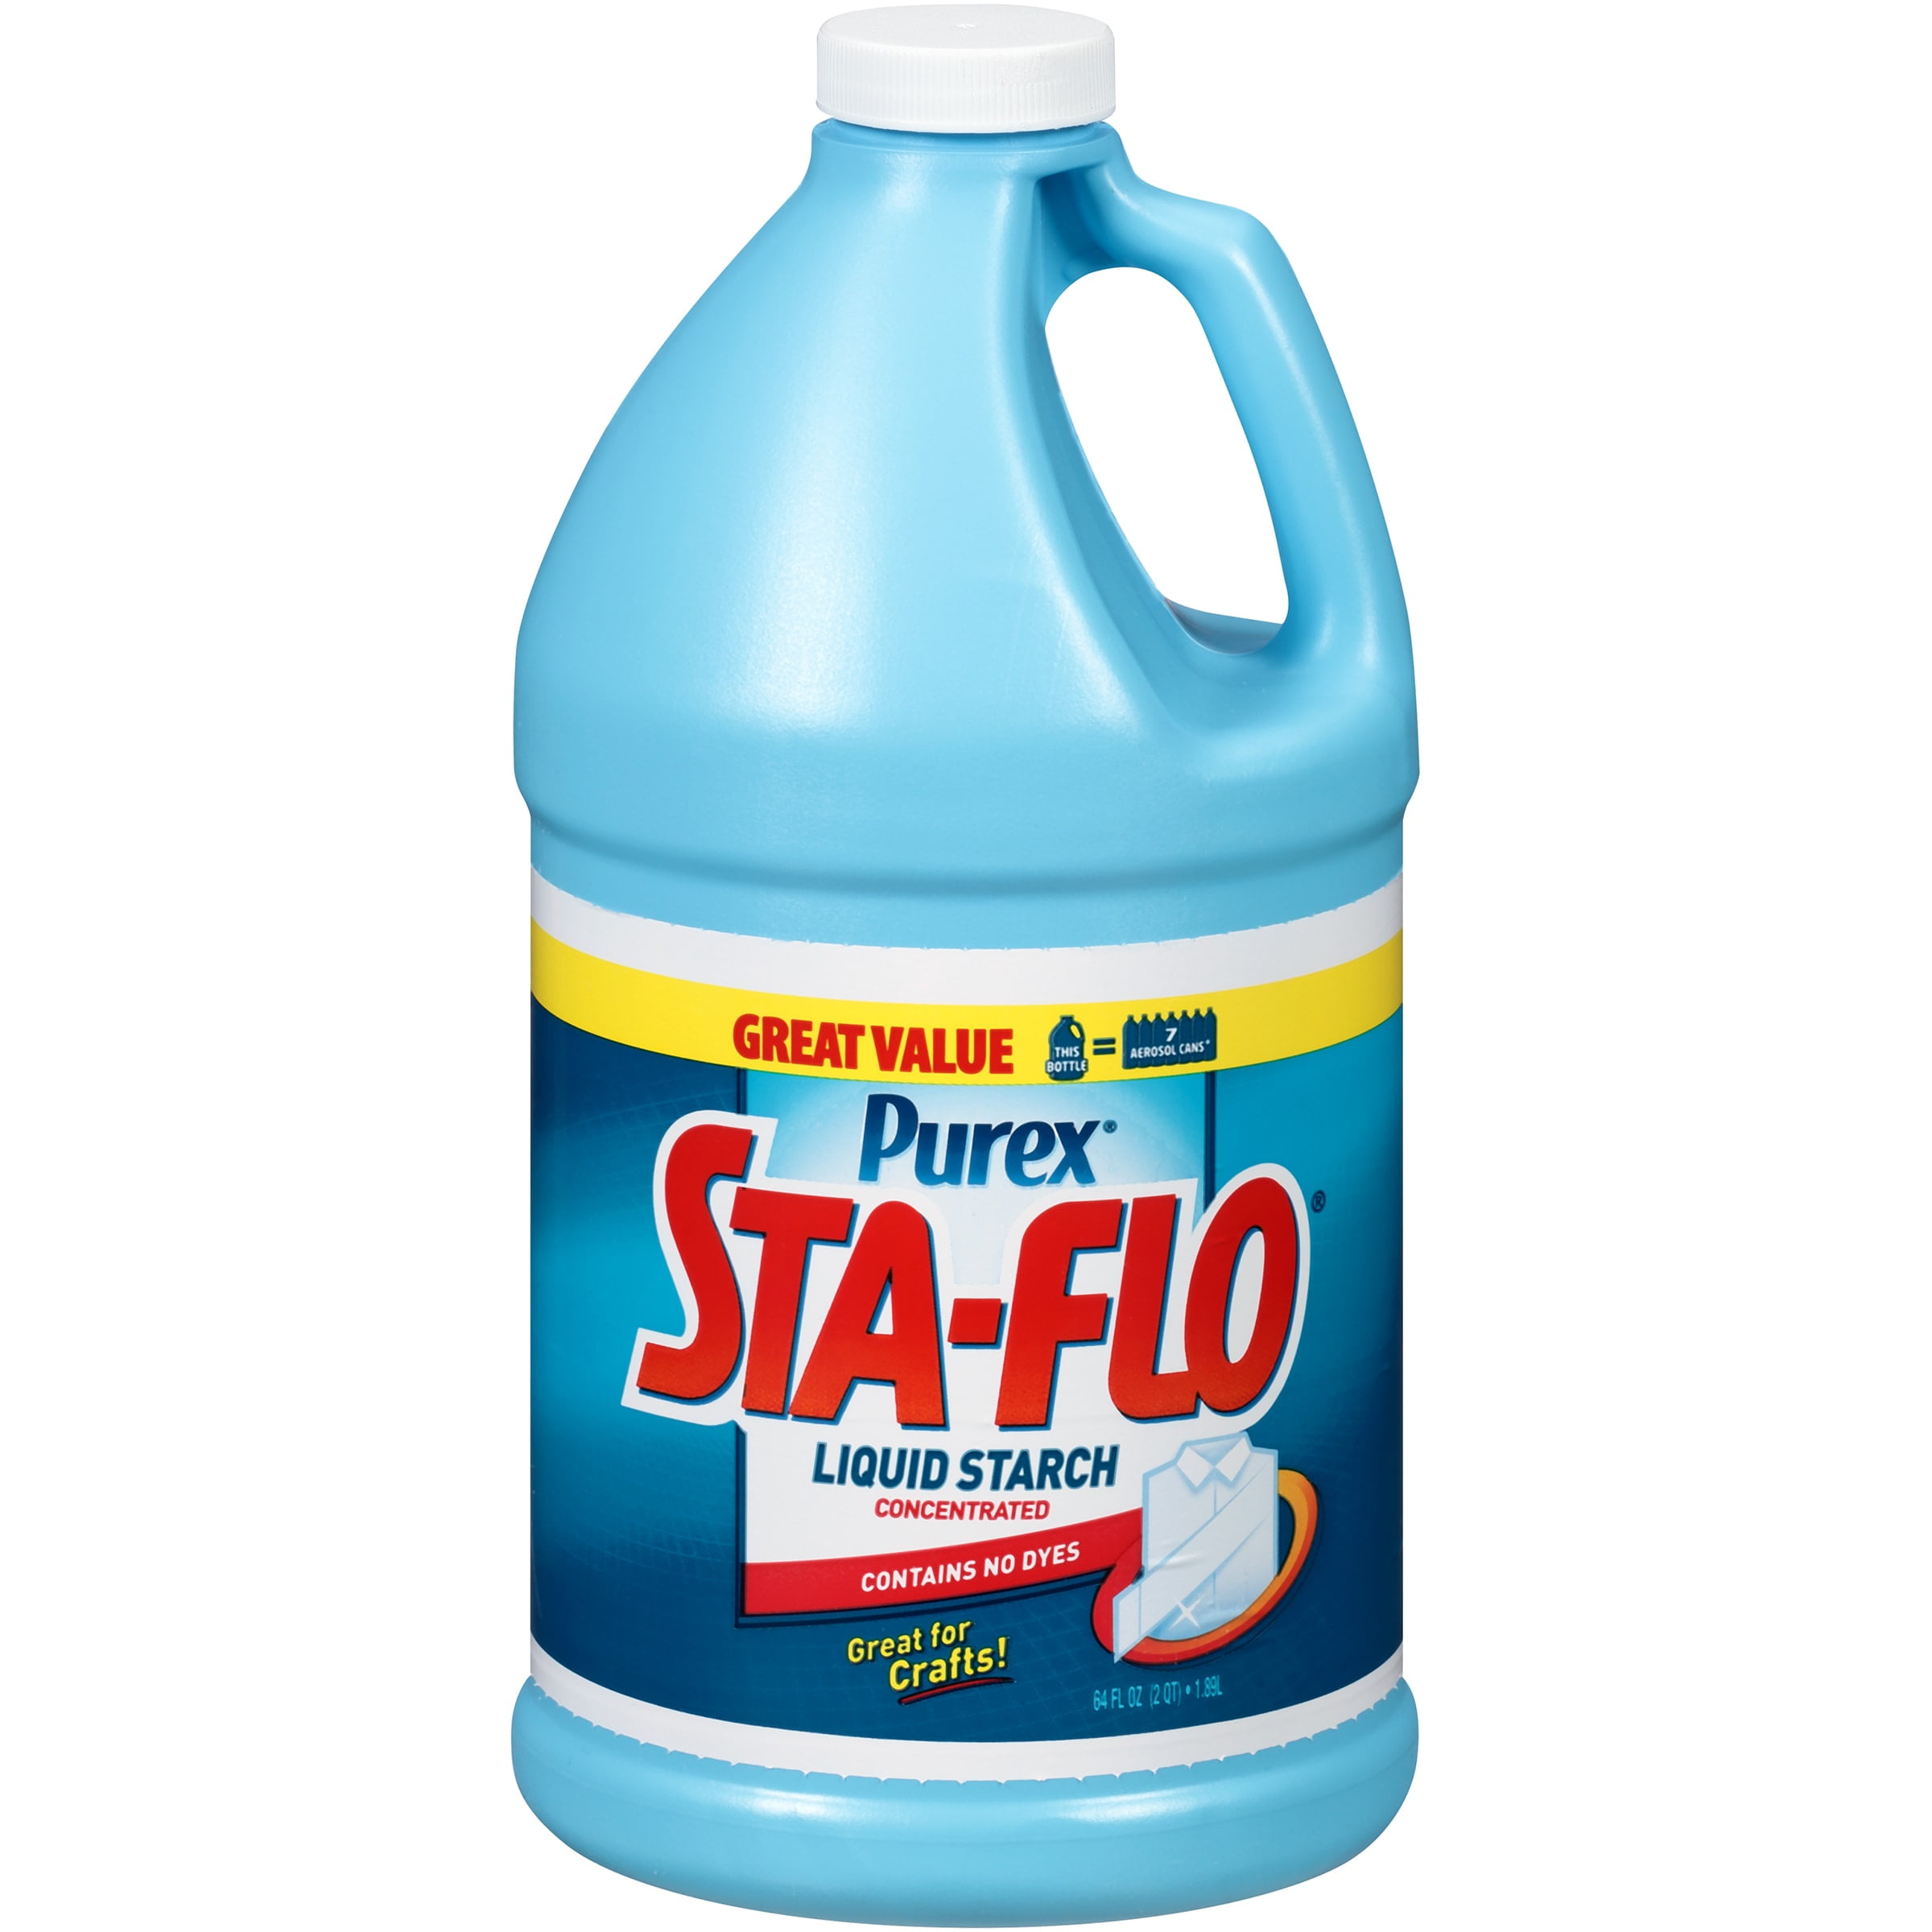 Purex Sta Flo Liquid Starch, Great for Crafts, Concentrated, 64